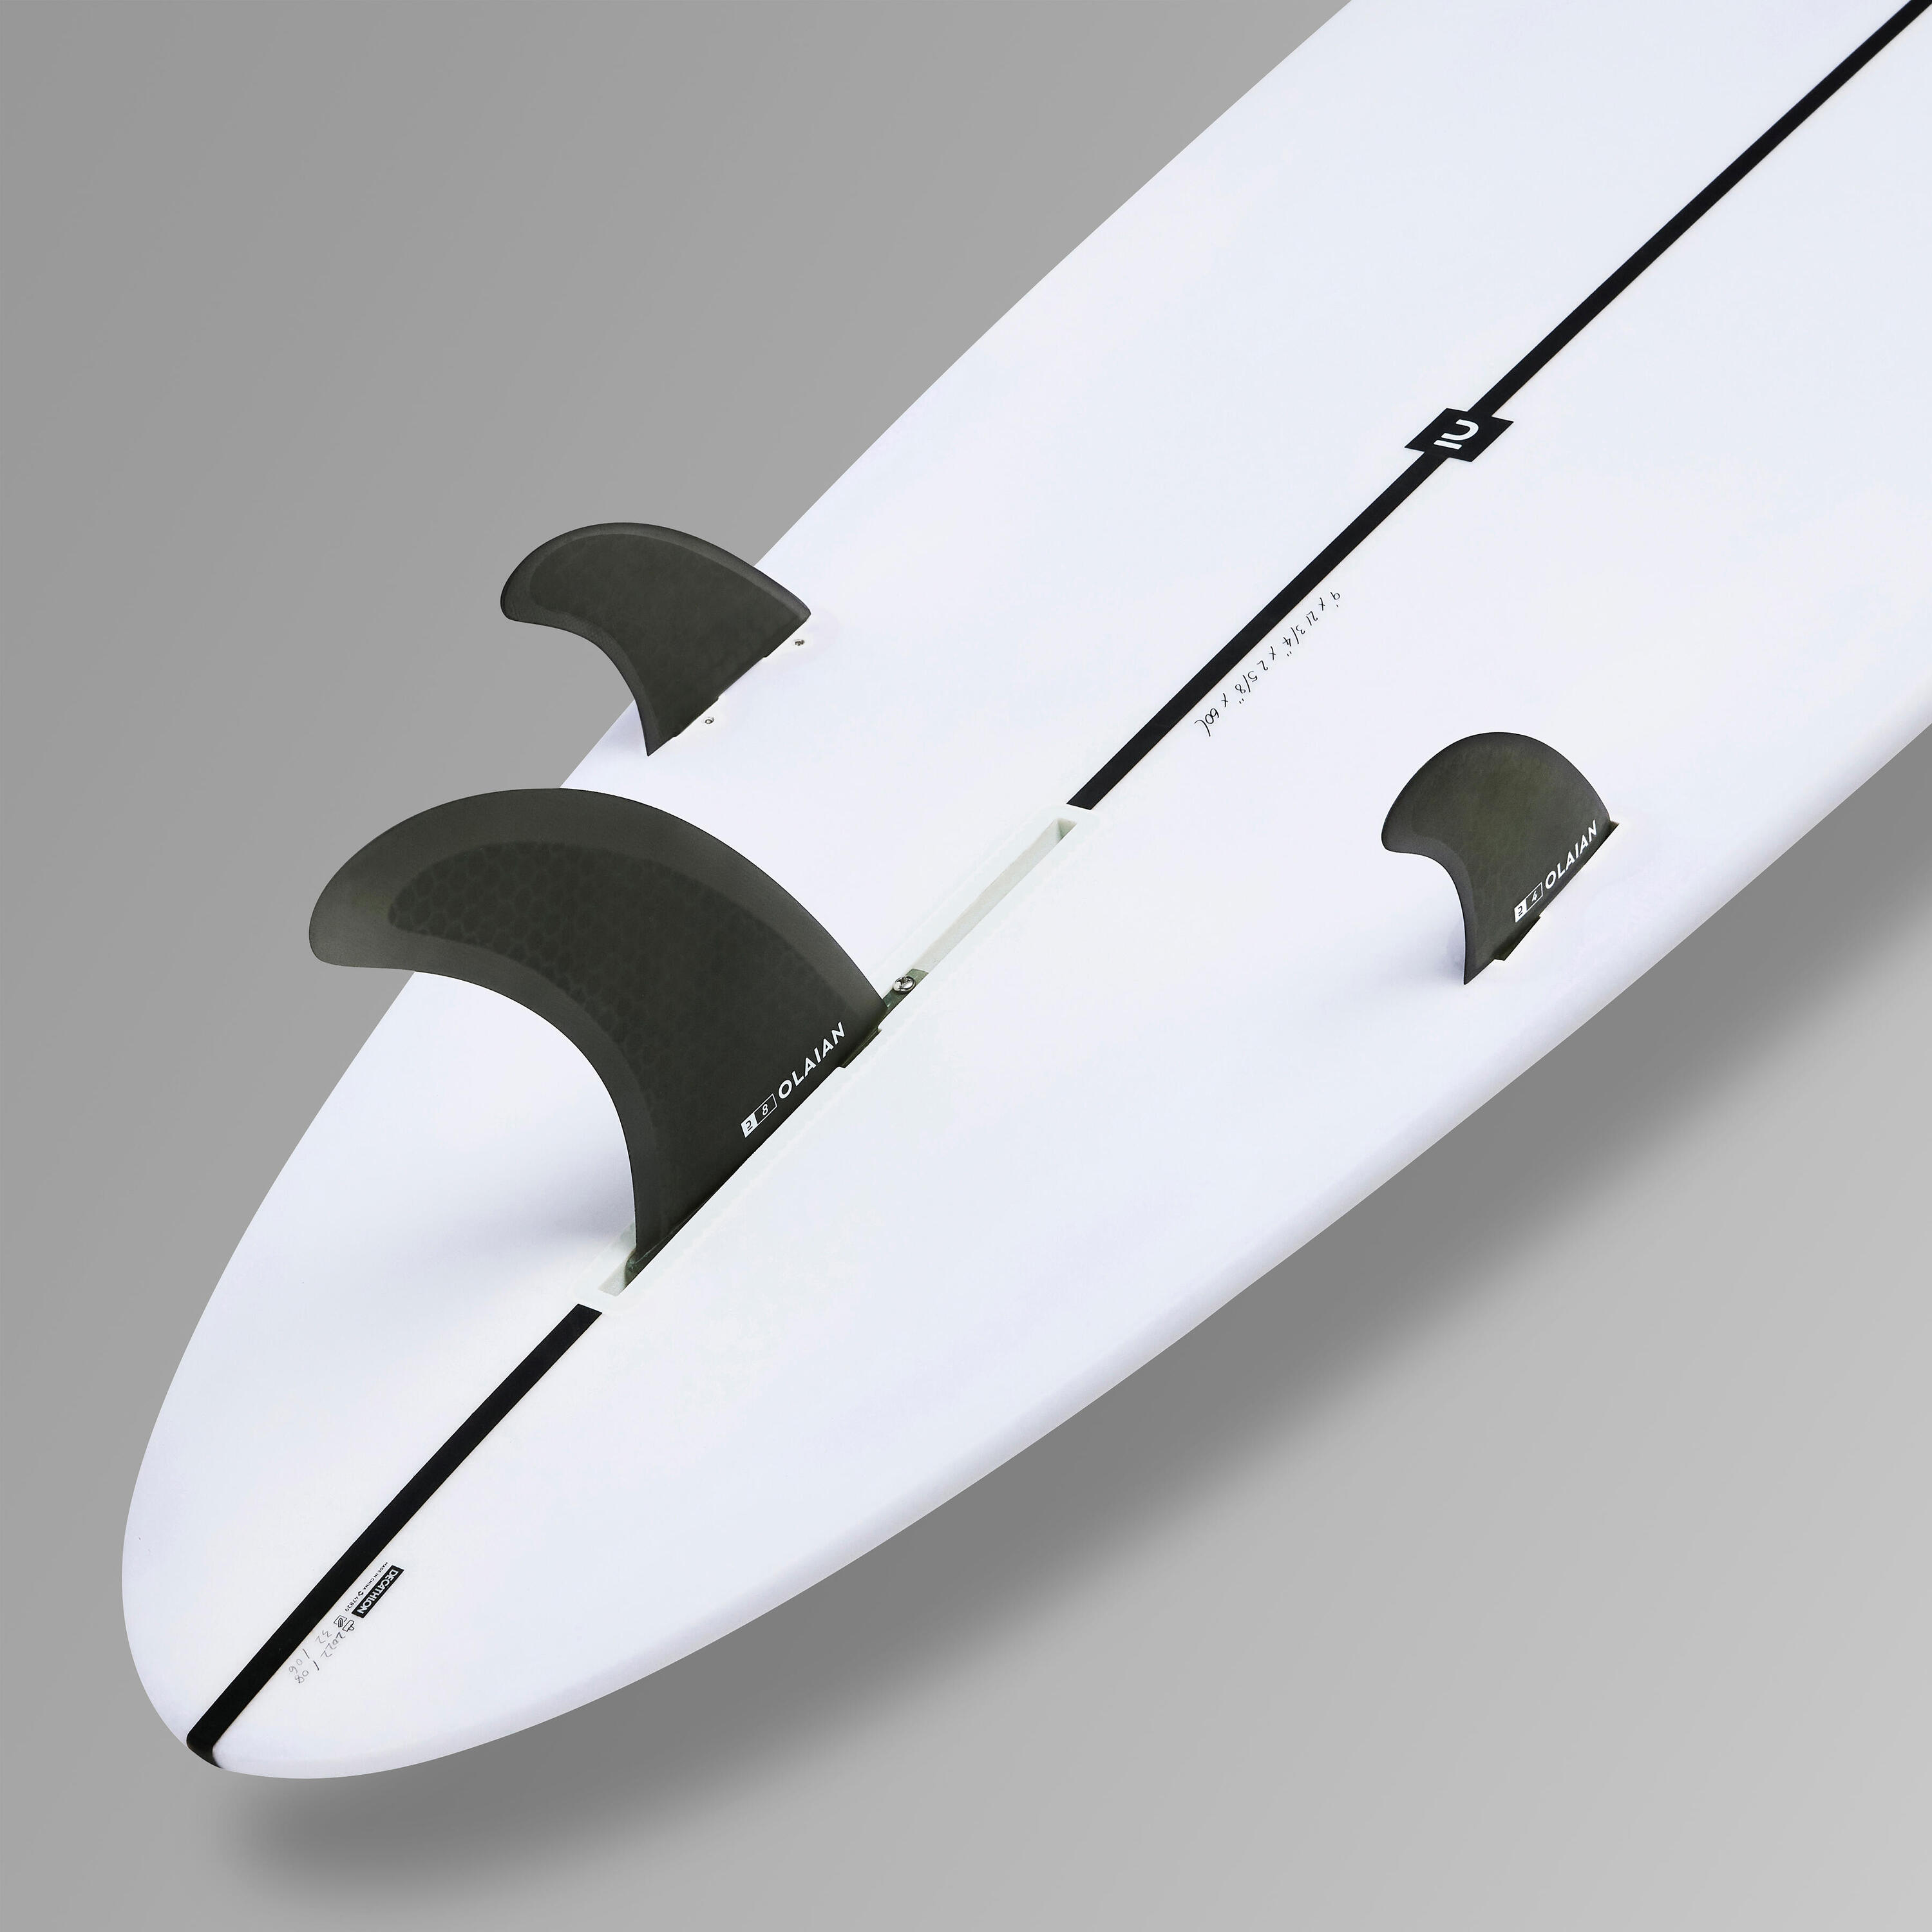 LONGBOARD 900 9' Performance 60 L. Comes with 2+1 setup 8" central fin. 9/14